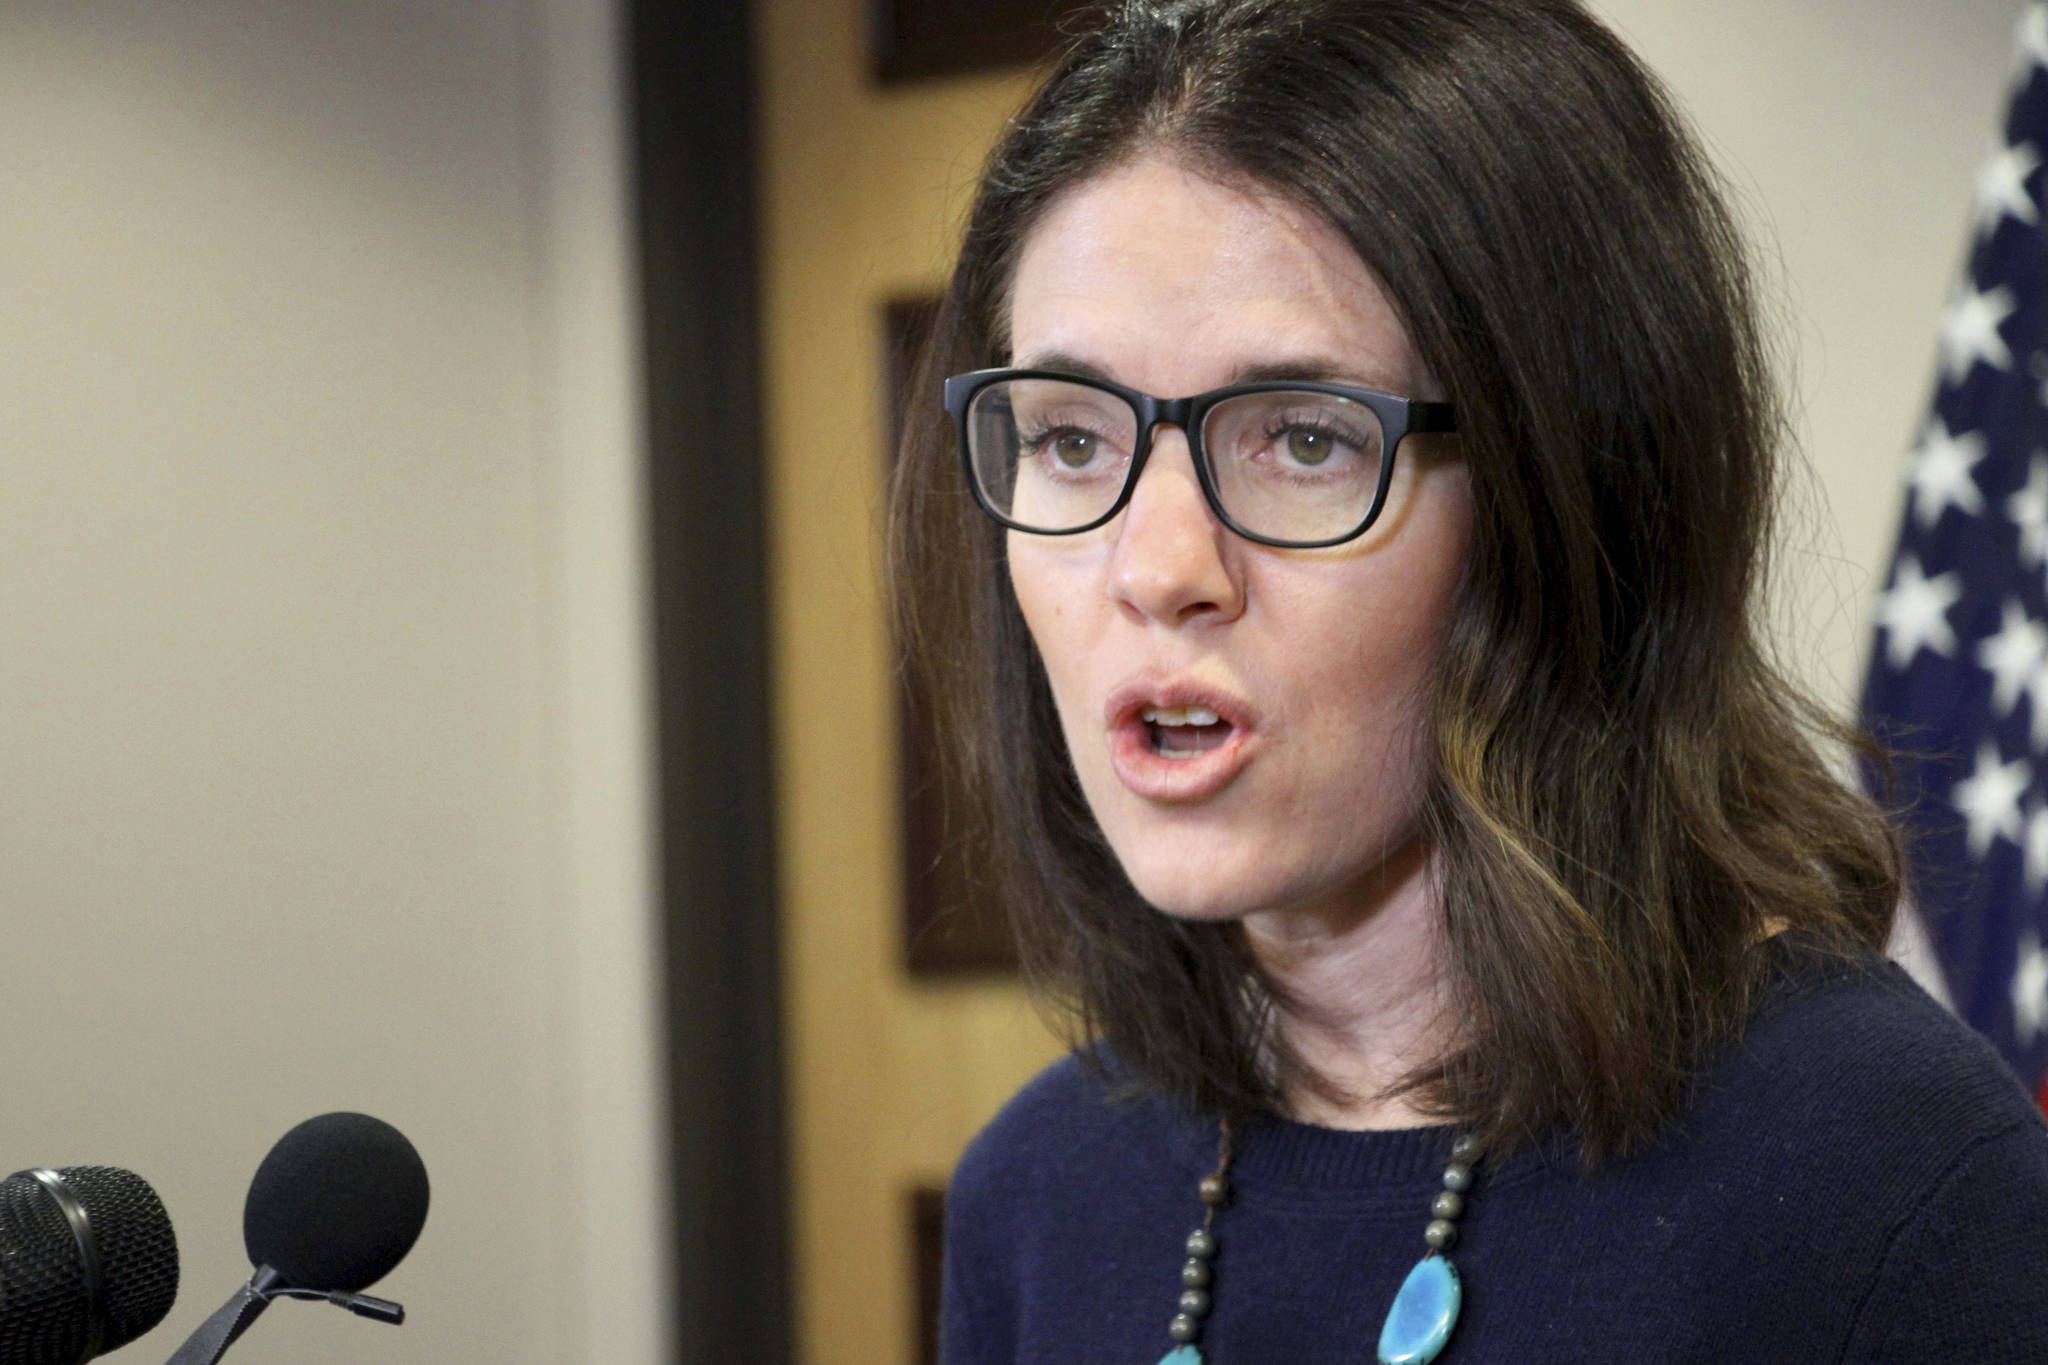 Dr. Anne Zink, the chief medical officer for the state of Alaska, addresses reporters at a news conference Monday in Anchorage. (AP Photo/Mark Thiessen)